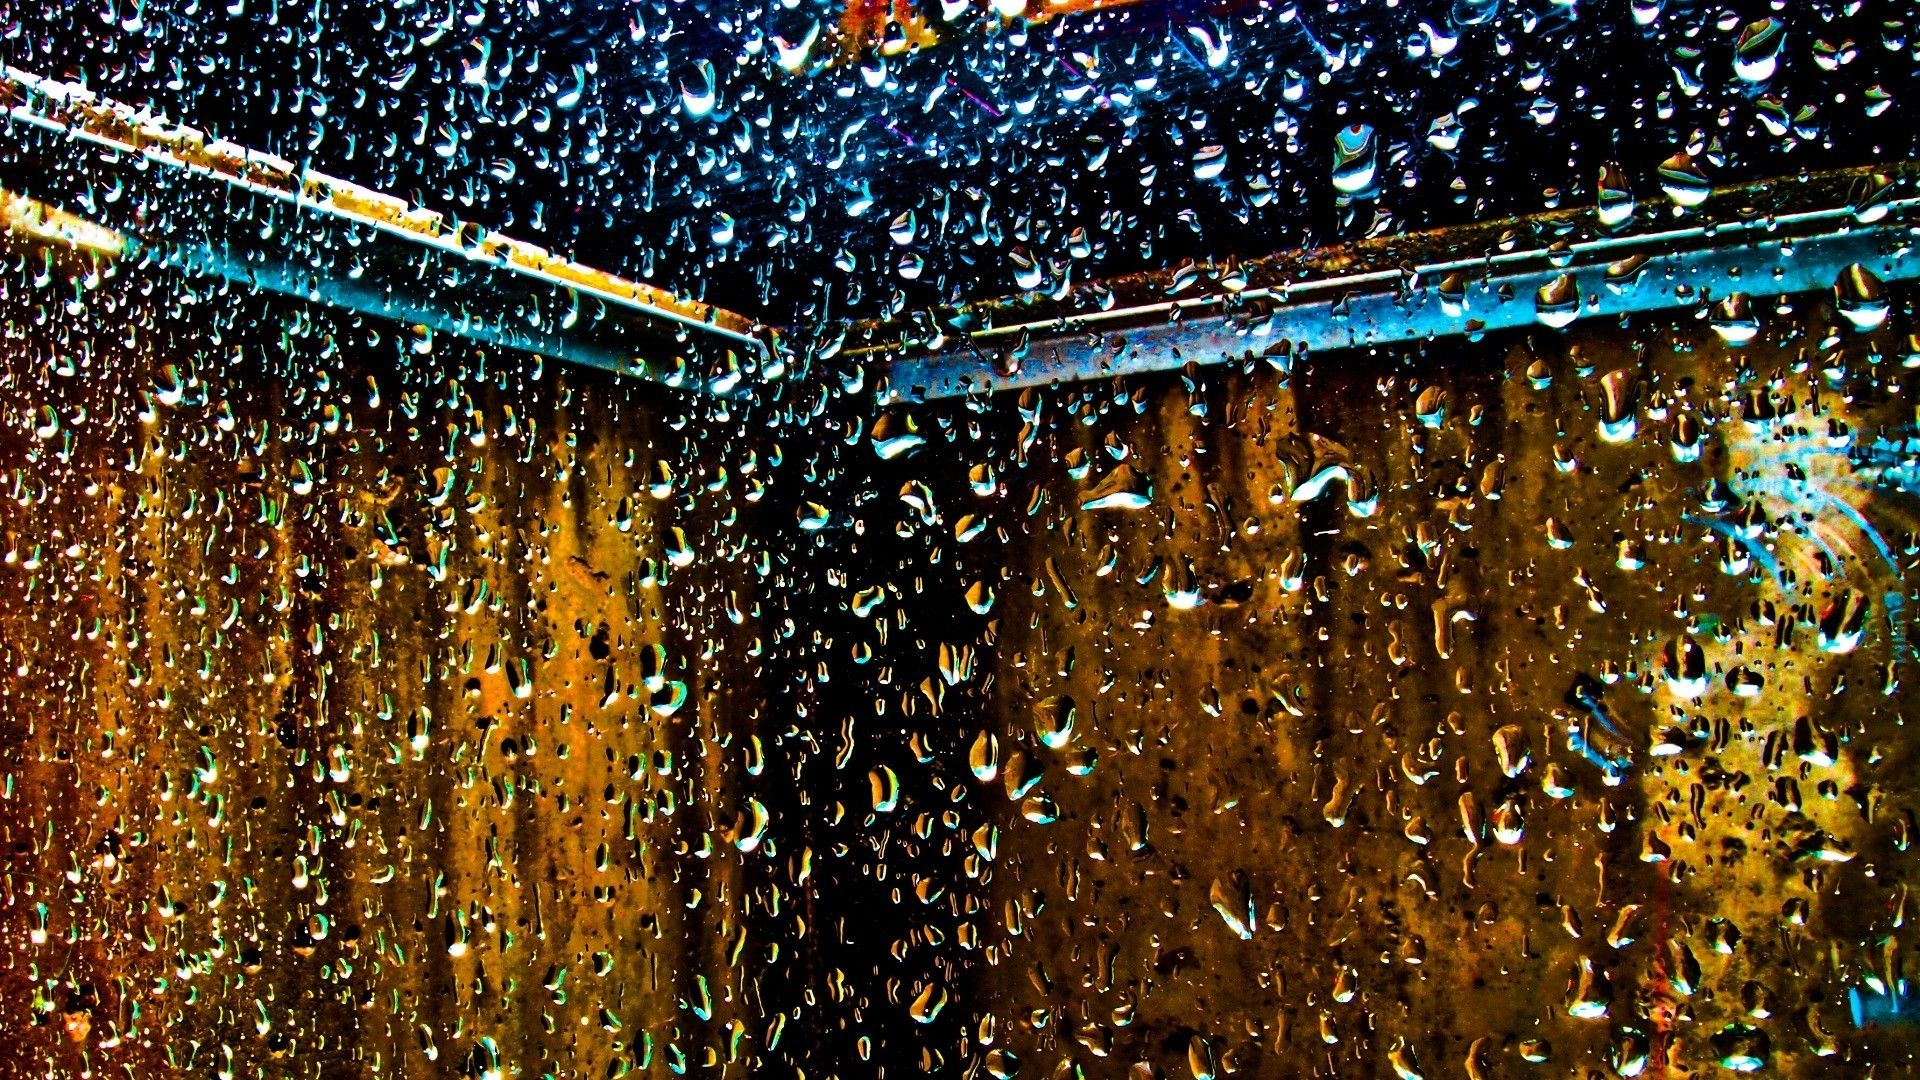 water, Droplets, Window, Panes, Glass, Drop, Drops Wallpaper HD / Desktop and Mobile Background